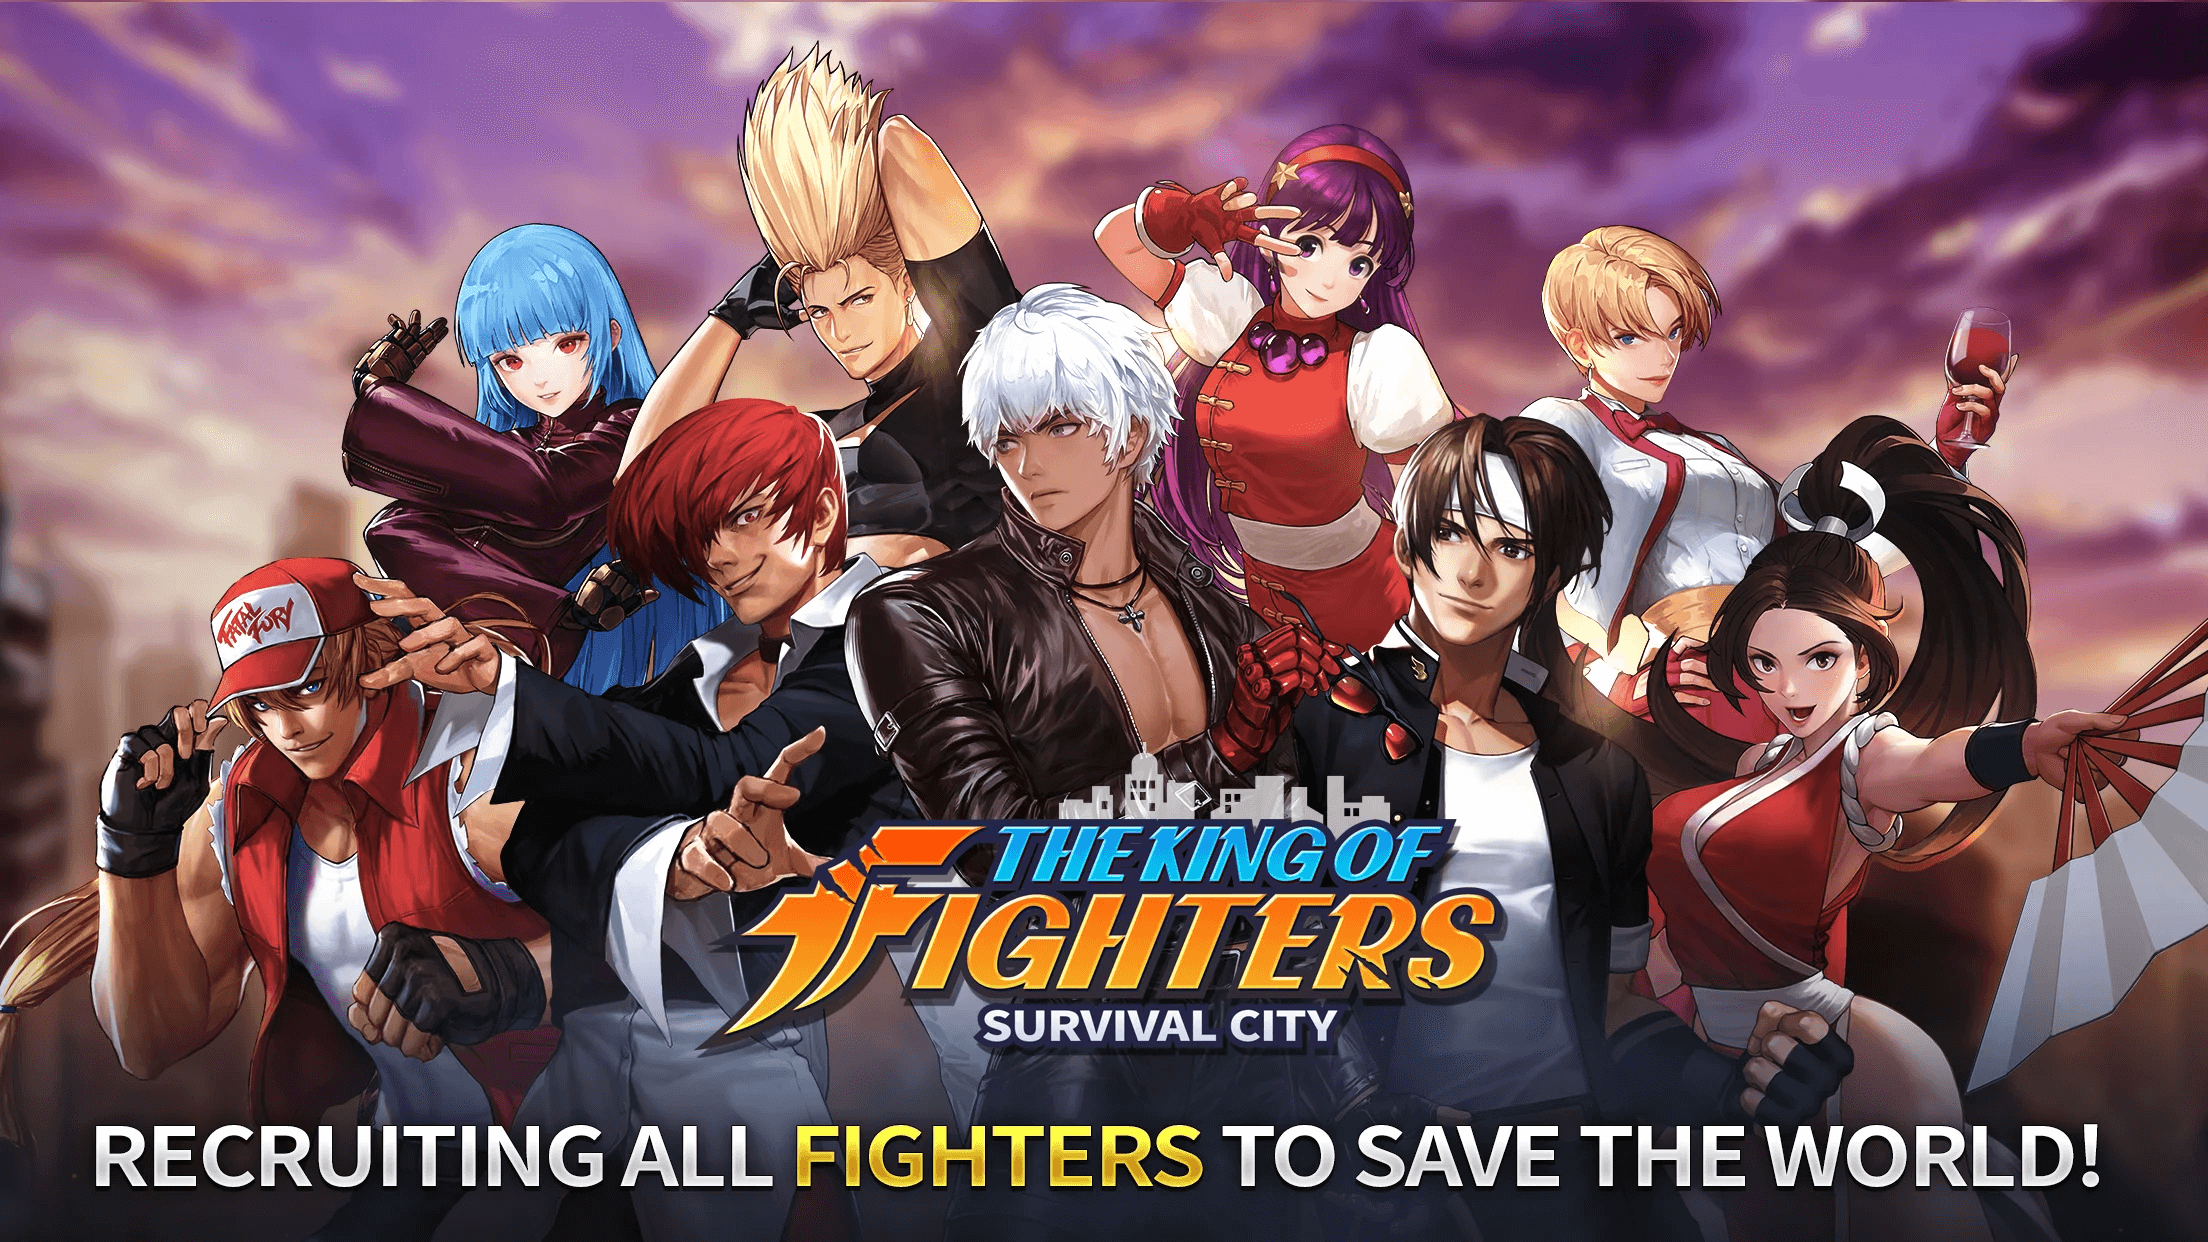 King of Fighters: Survival City has been soft-launched now